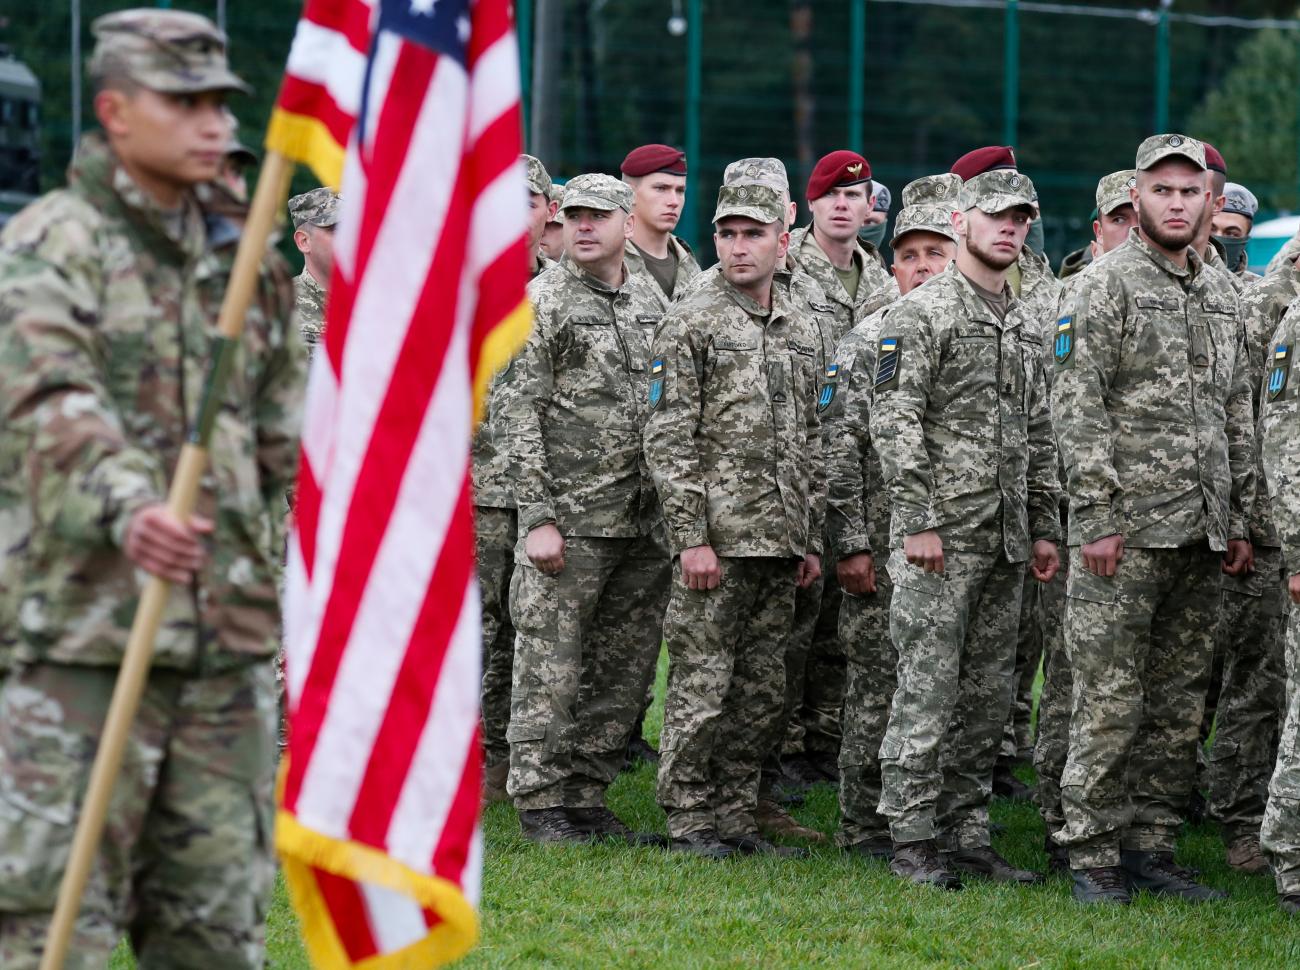 U.S. and Ukrainian armies attend the opening ceremony of the "RAPID TRIDENT-2021" military exercise at Ukraine's International Peacekeeping Security Centre near Yavoriv, in the Lviv region, Ukraine September 20, 2021.